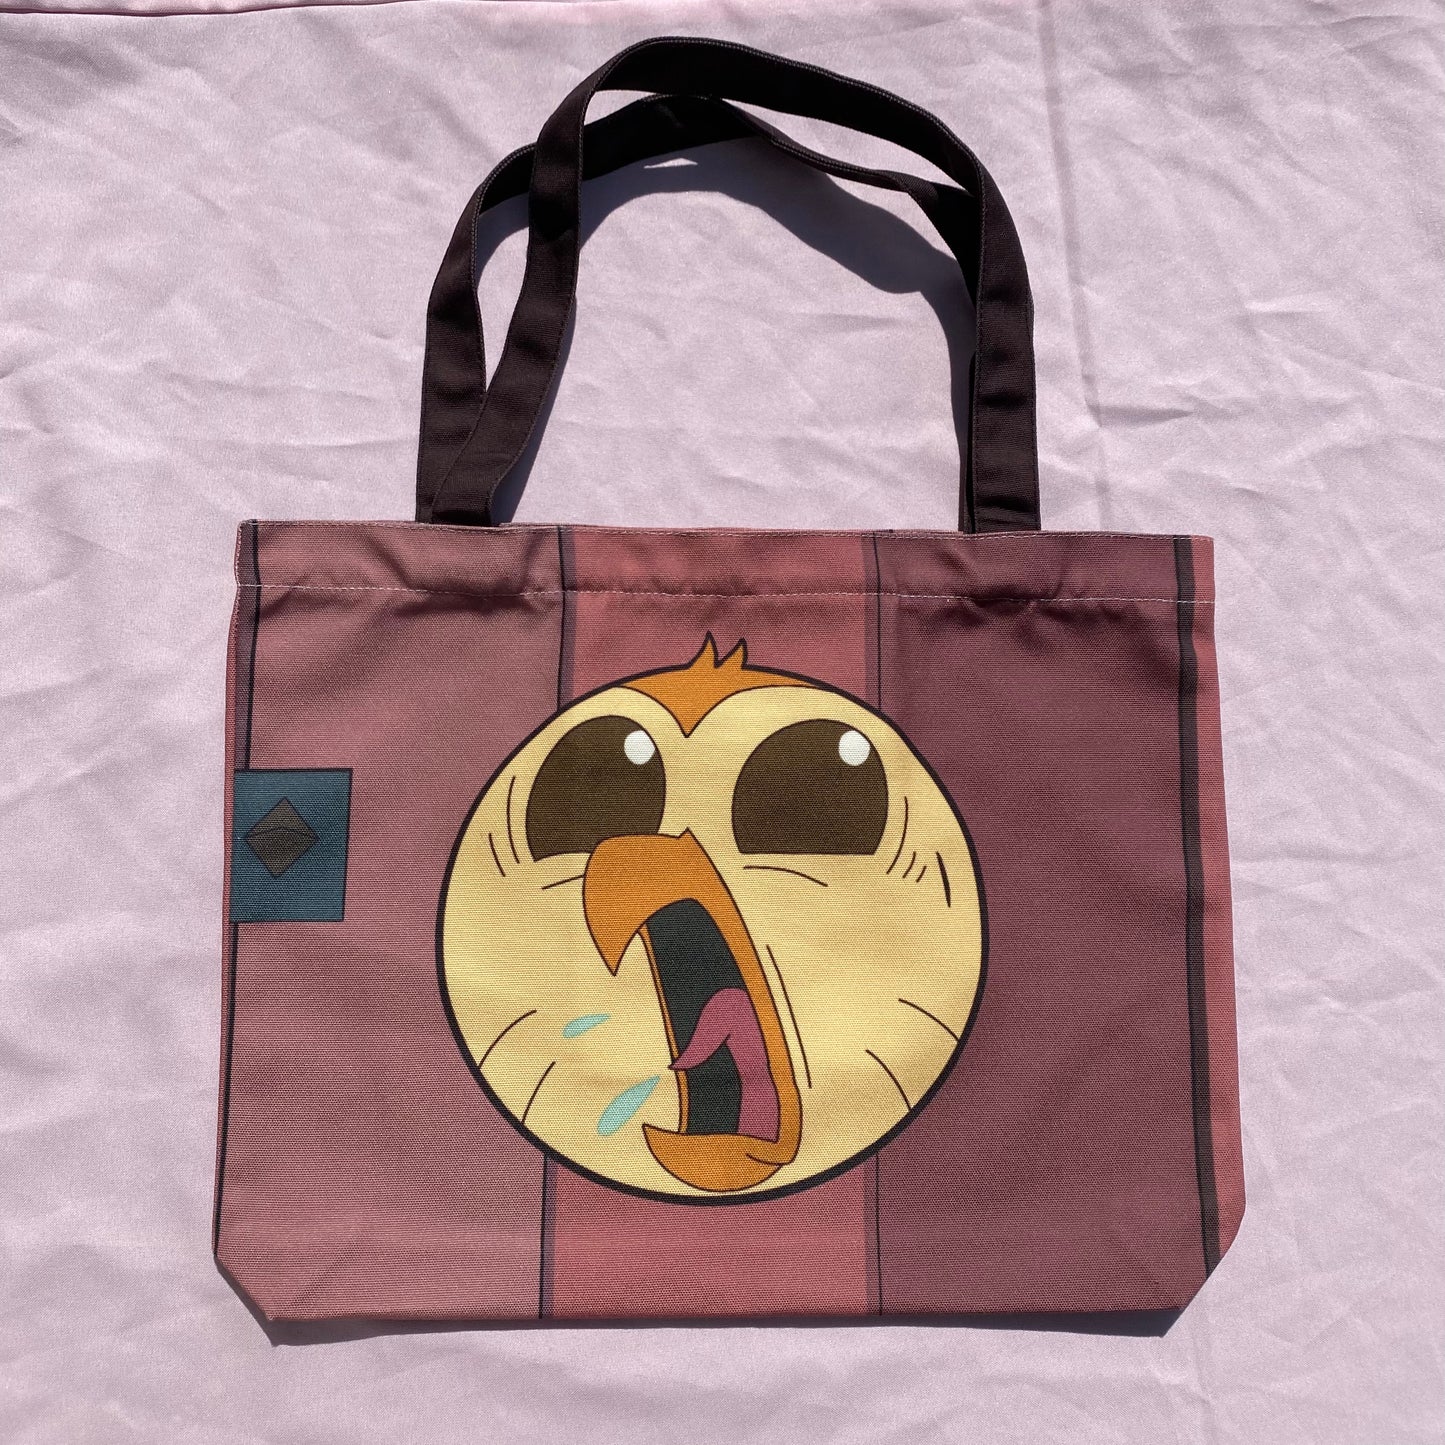 Screaming’ and Hootin’ Double sided Zipper Tote Bag